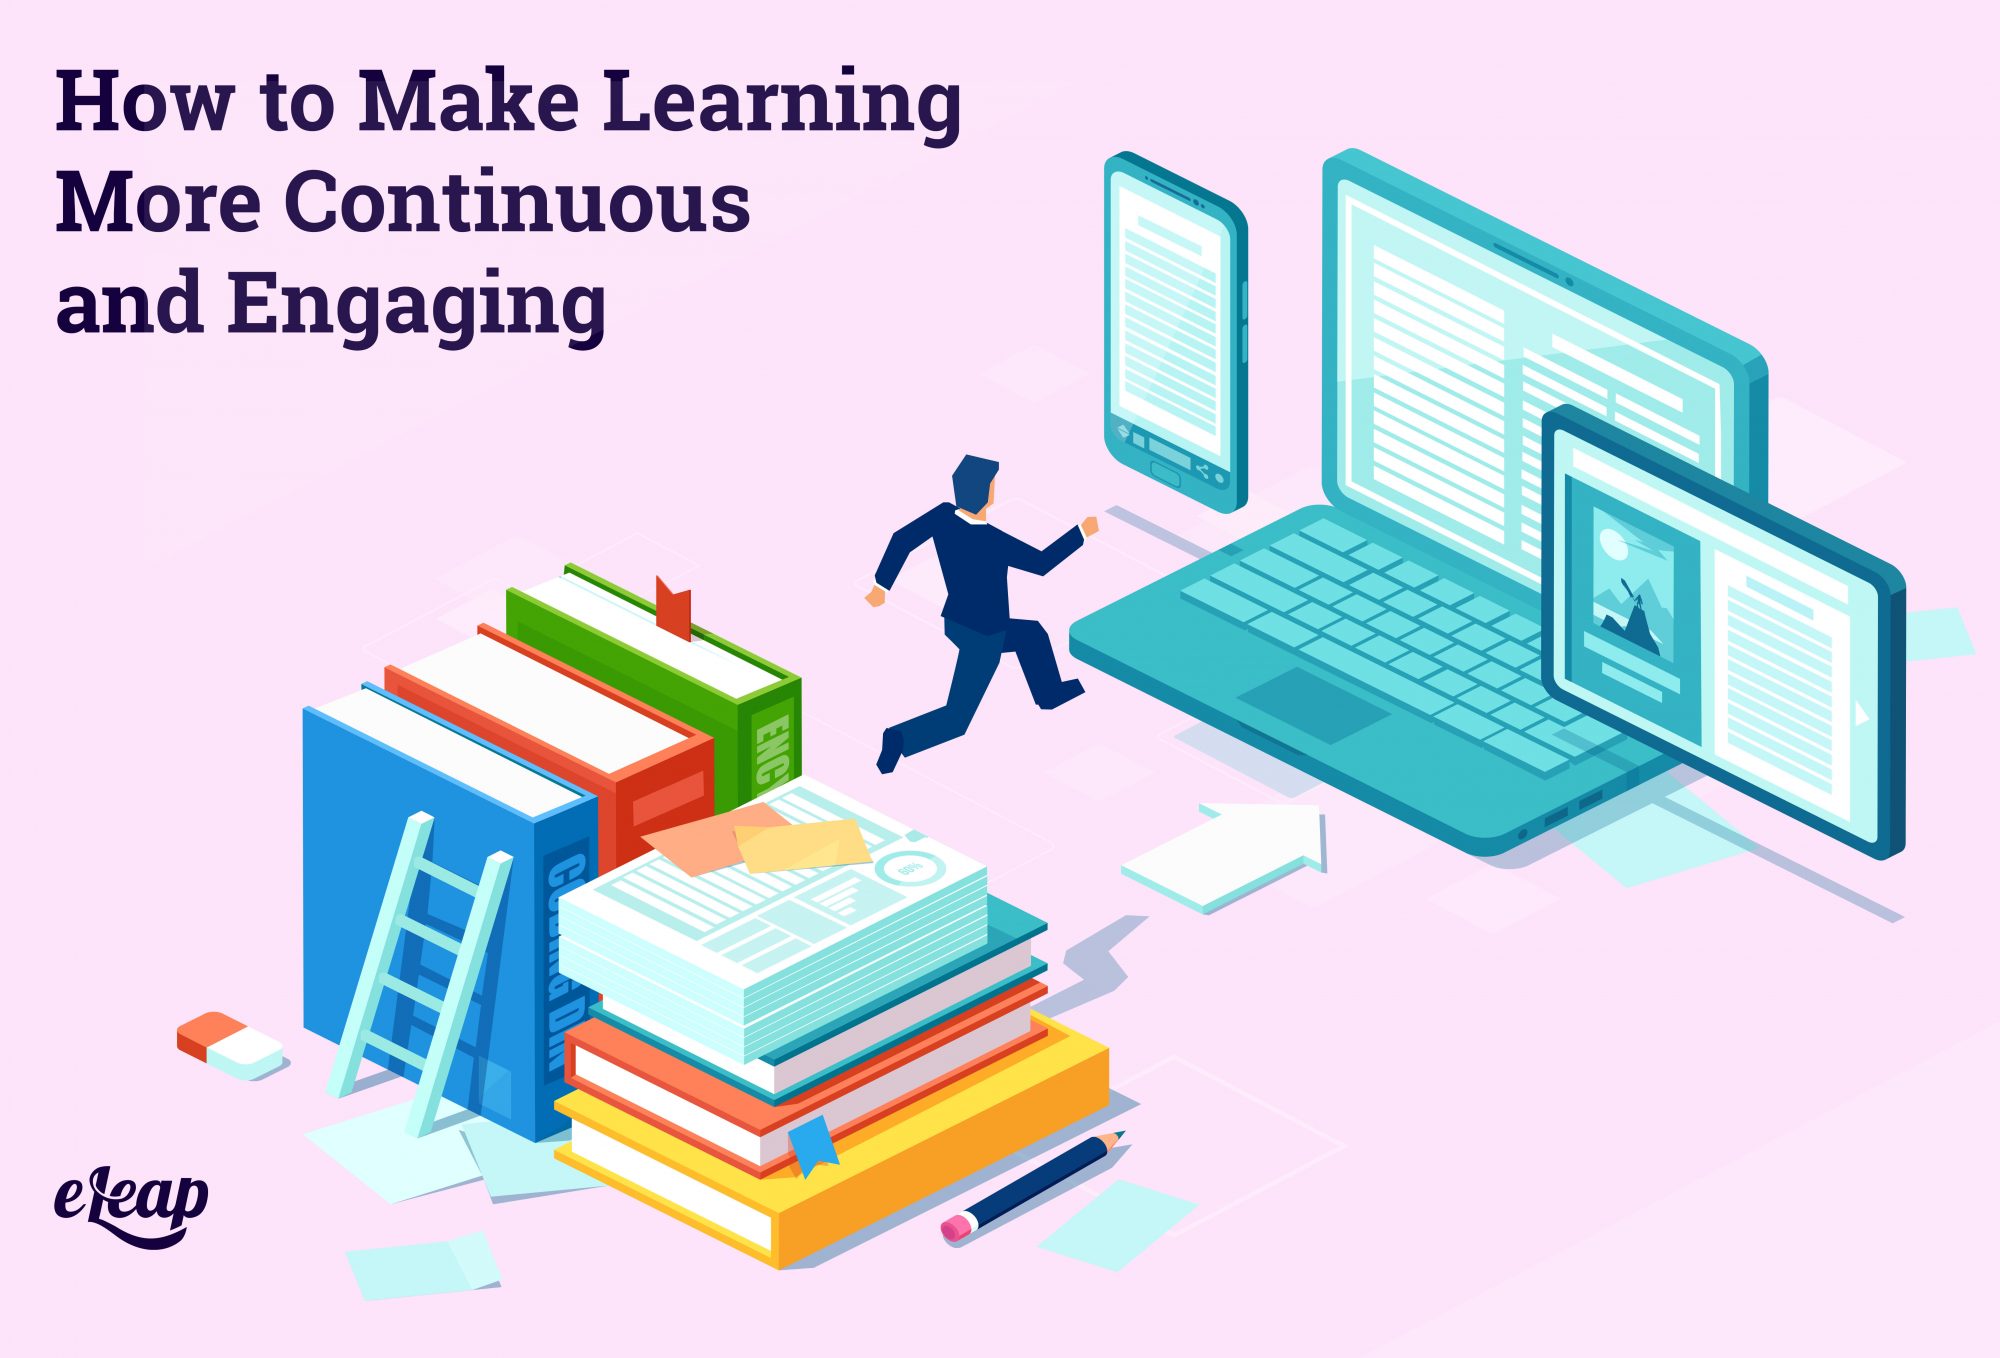 How to Make Learning More Continuous and Engaging